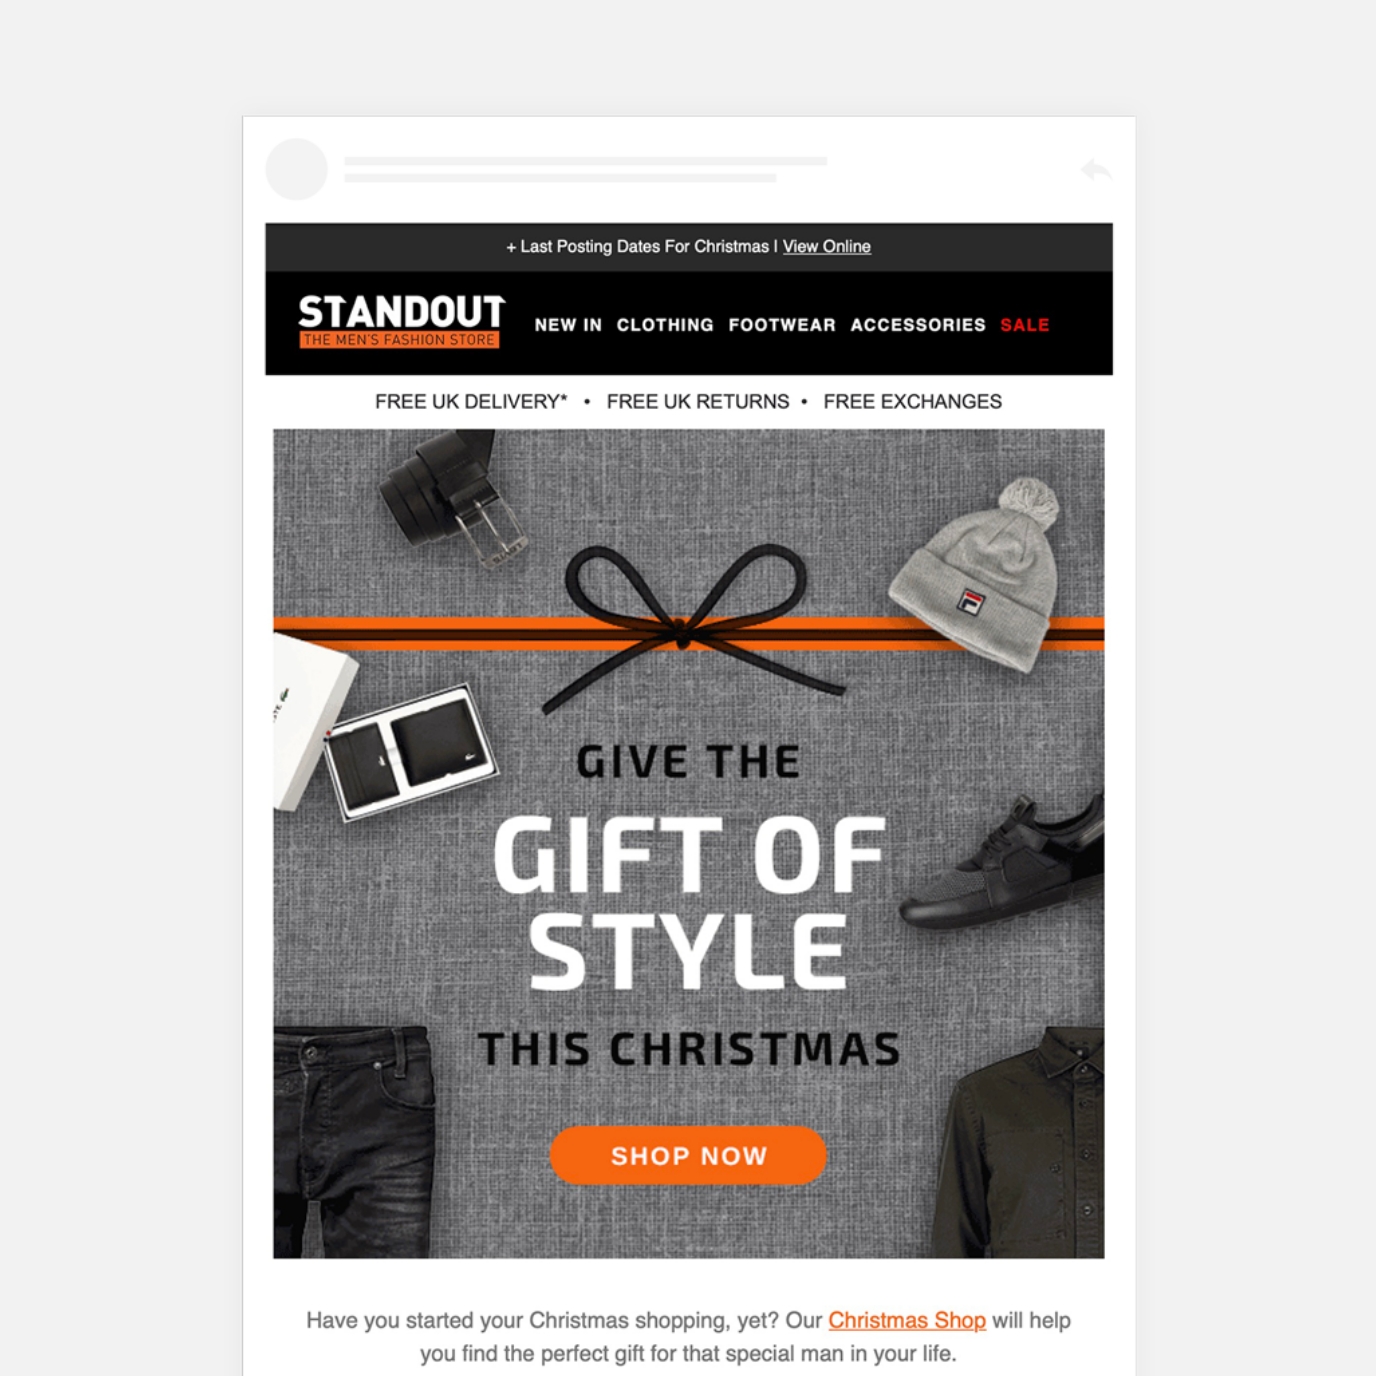 Standout email campaign